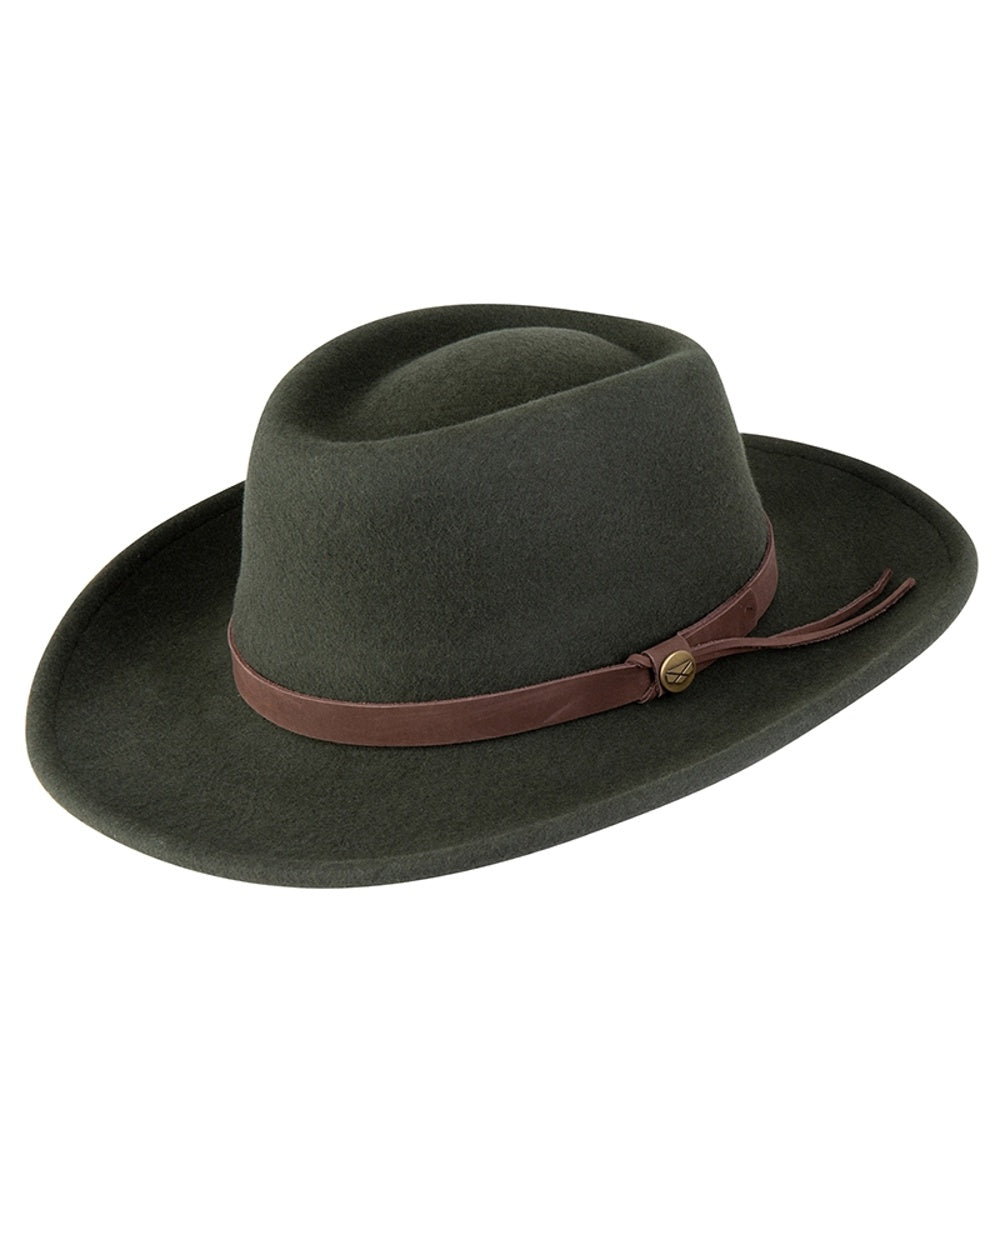 Olive Coloured Hoggs Of Fife Perth Crushable Felt Hat On A White Background 